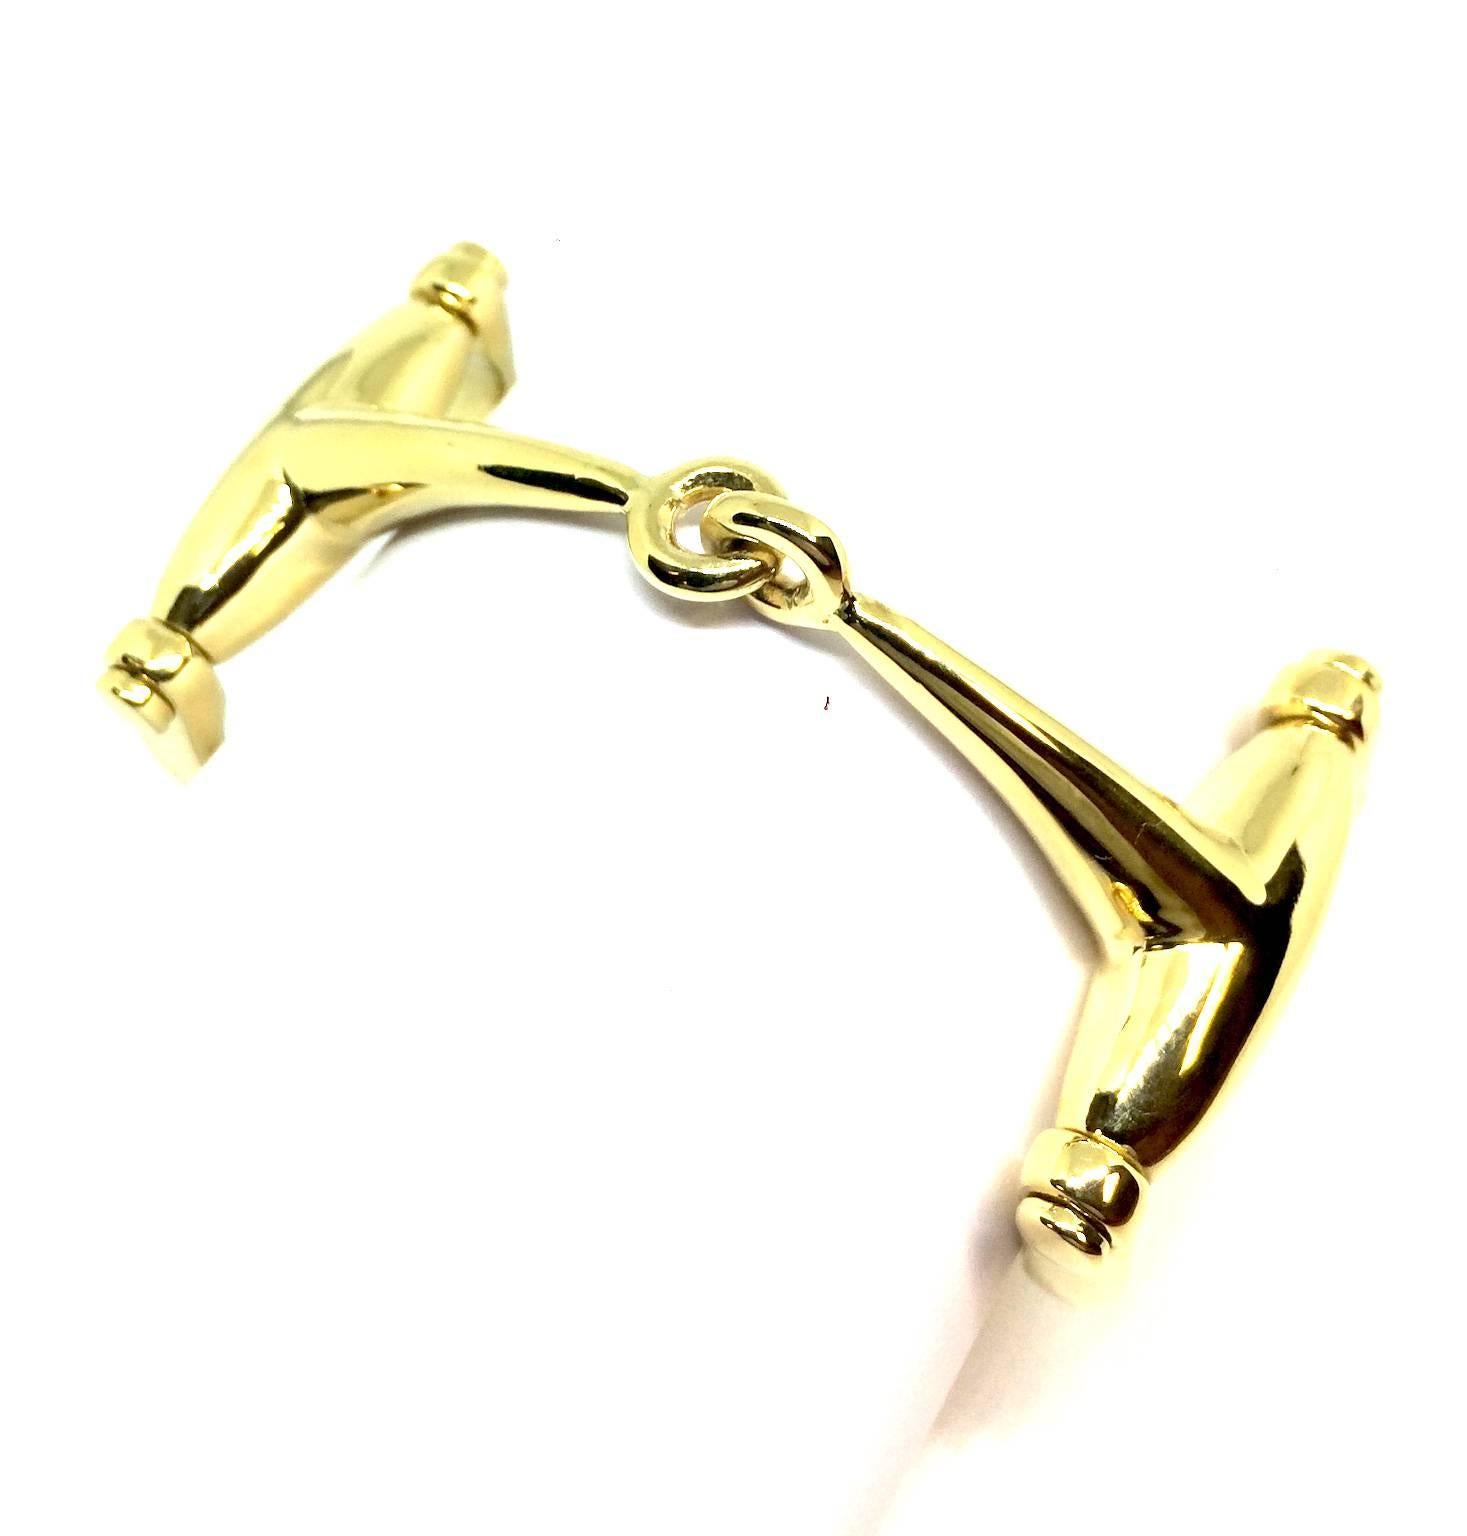 CARLO WEINGRILL 18k yellow gold horse bit bracelet completely handmade in Italy 